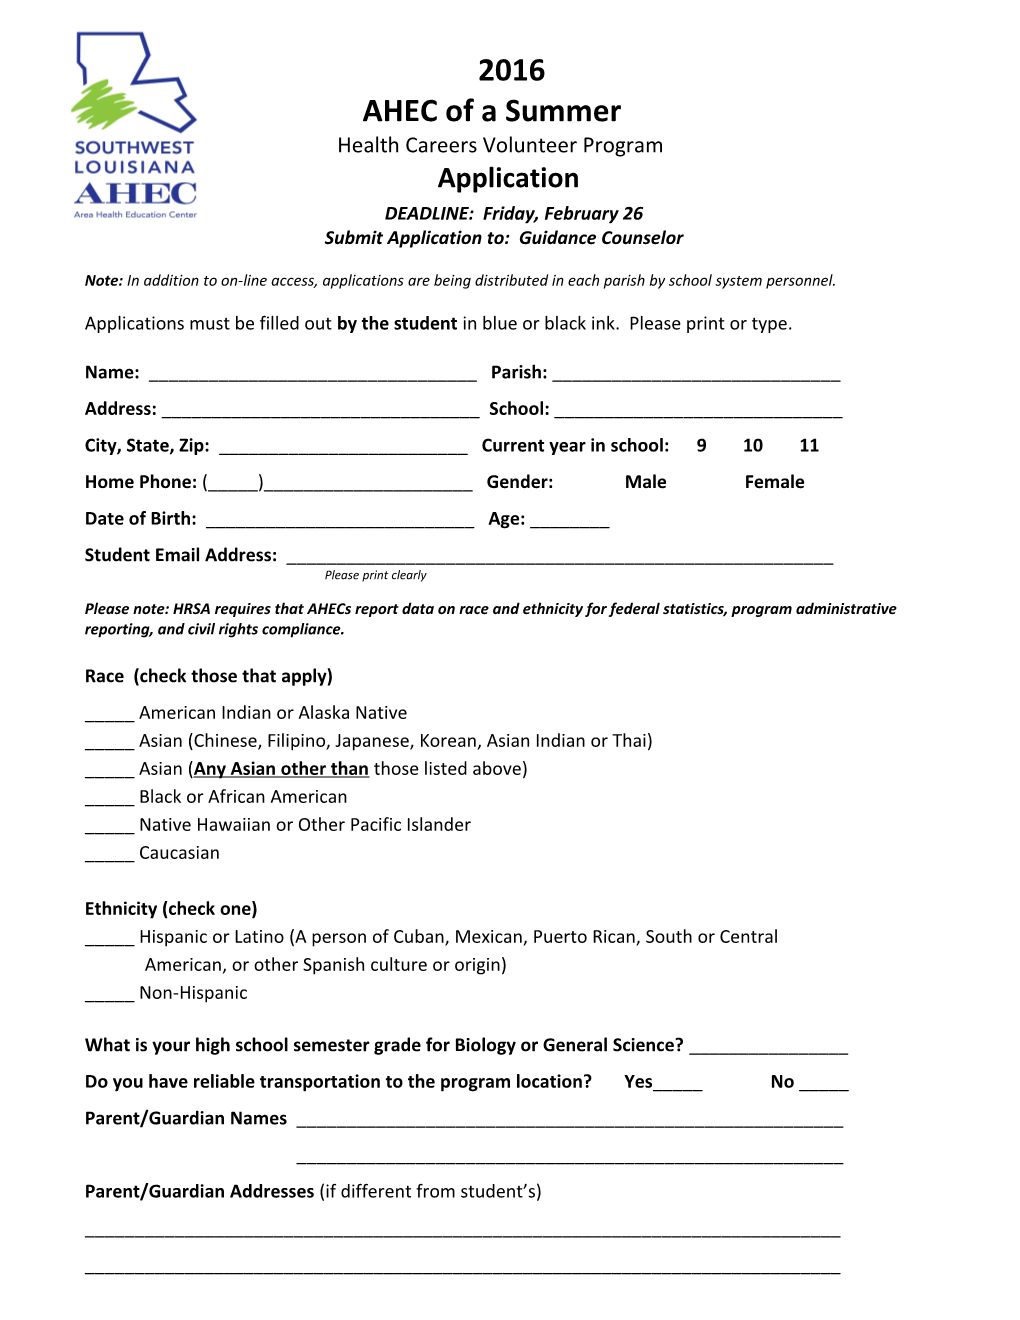 Submit Application To: Guidance Counselor